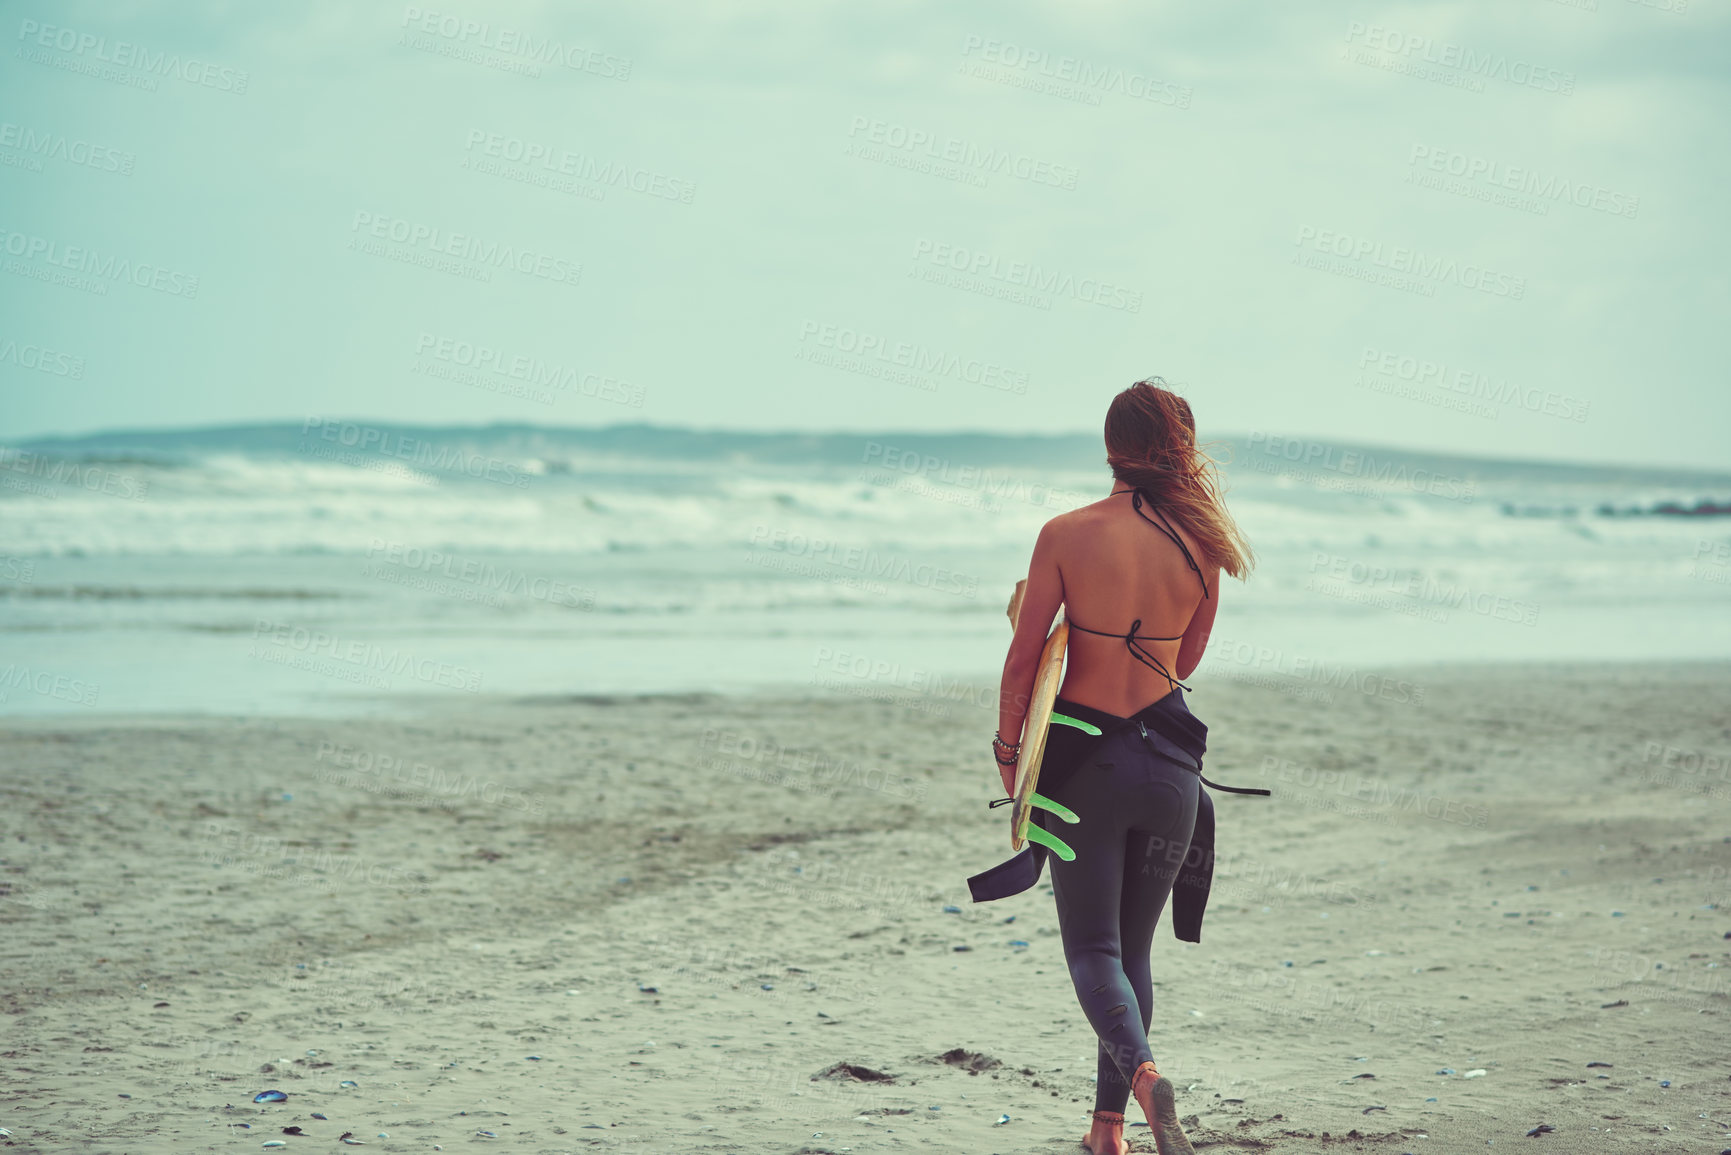 Buy stock photo Shot of a young surfer carrying her surfboard on the beach